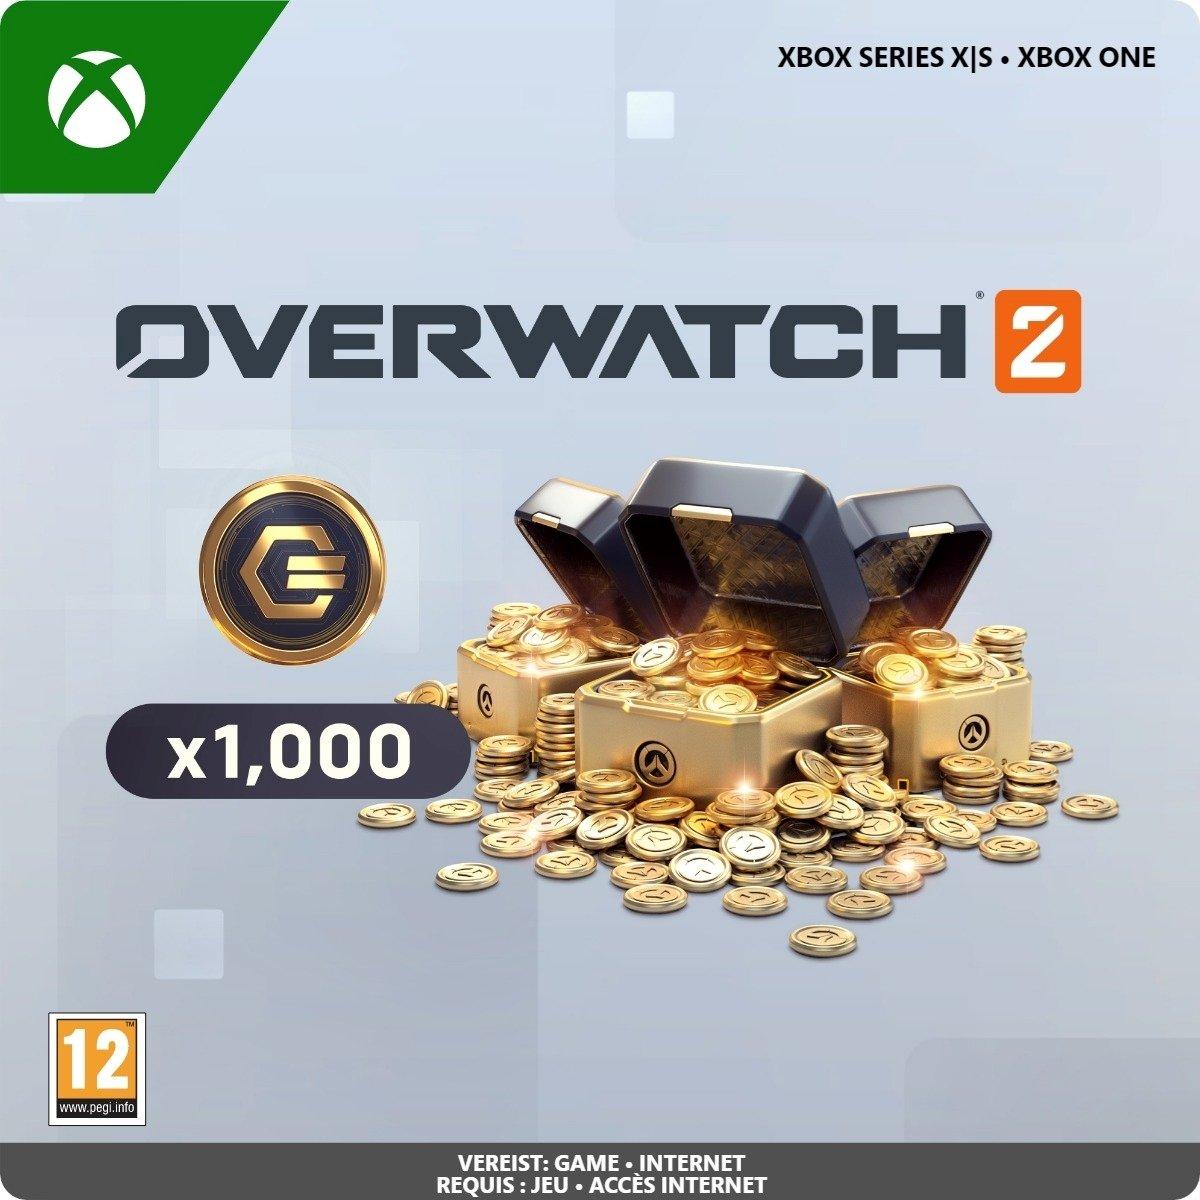 Overwatch 2 Coins - 1,000 - Xbox Series X/Xbox One - Currency | 7F6-00488 (bd05b275-c124-f447-9c09-ea4c0c576930)